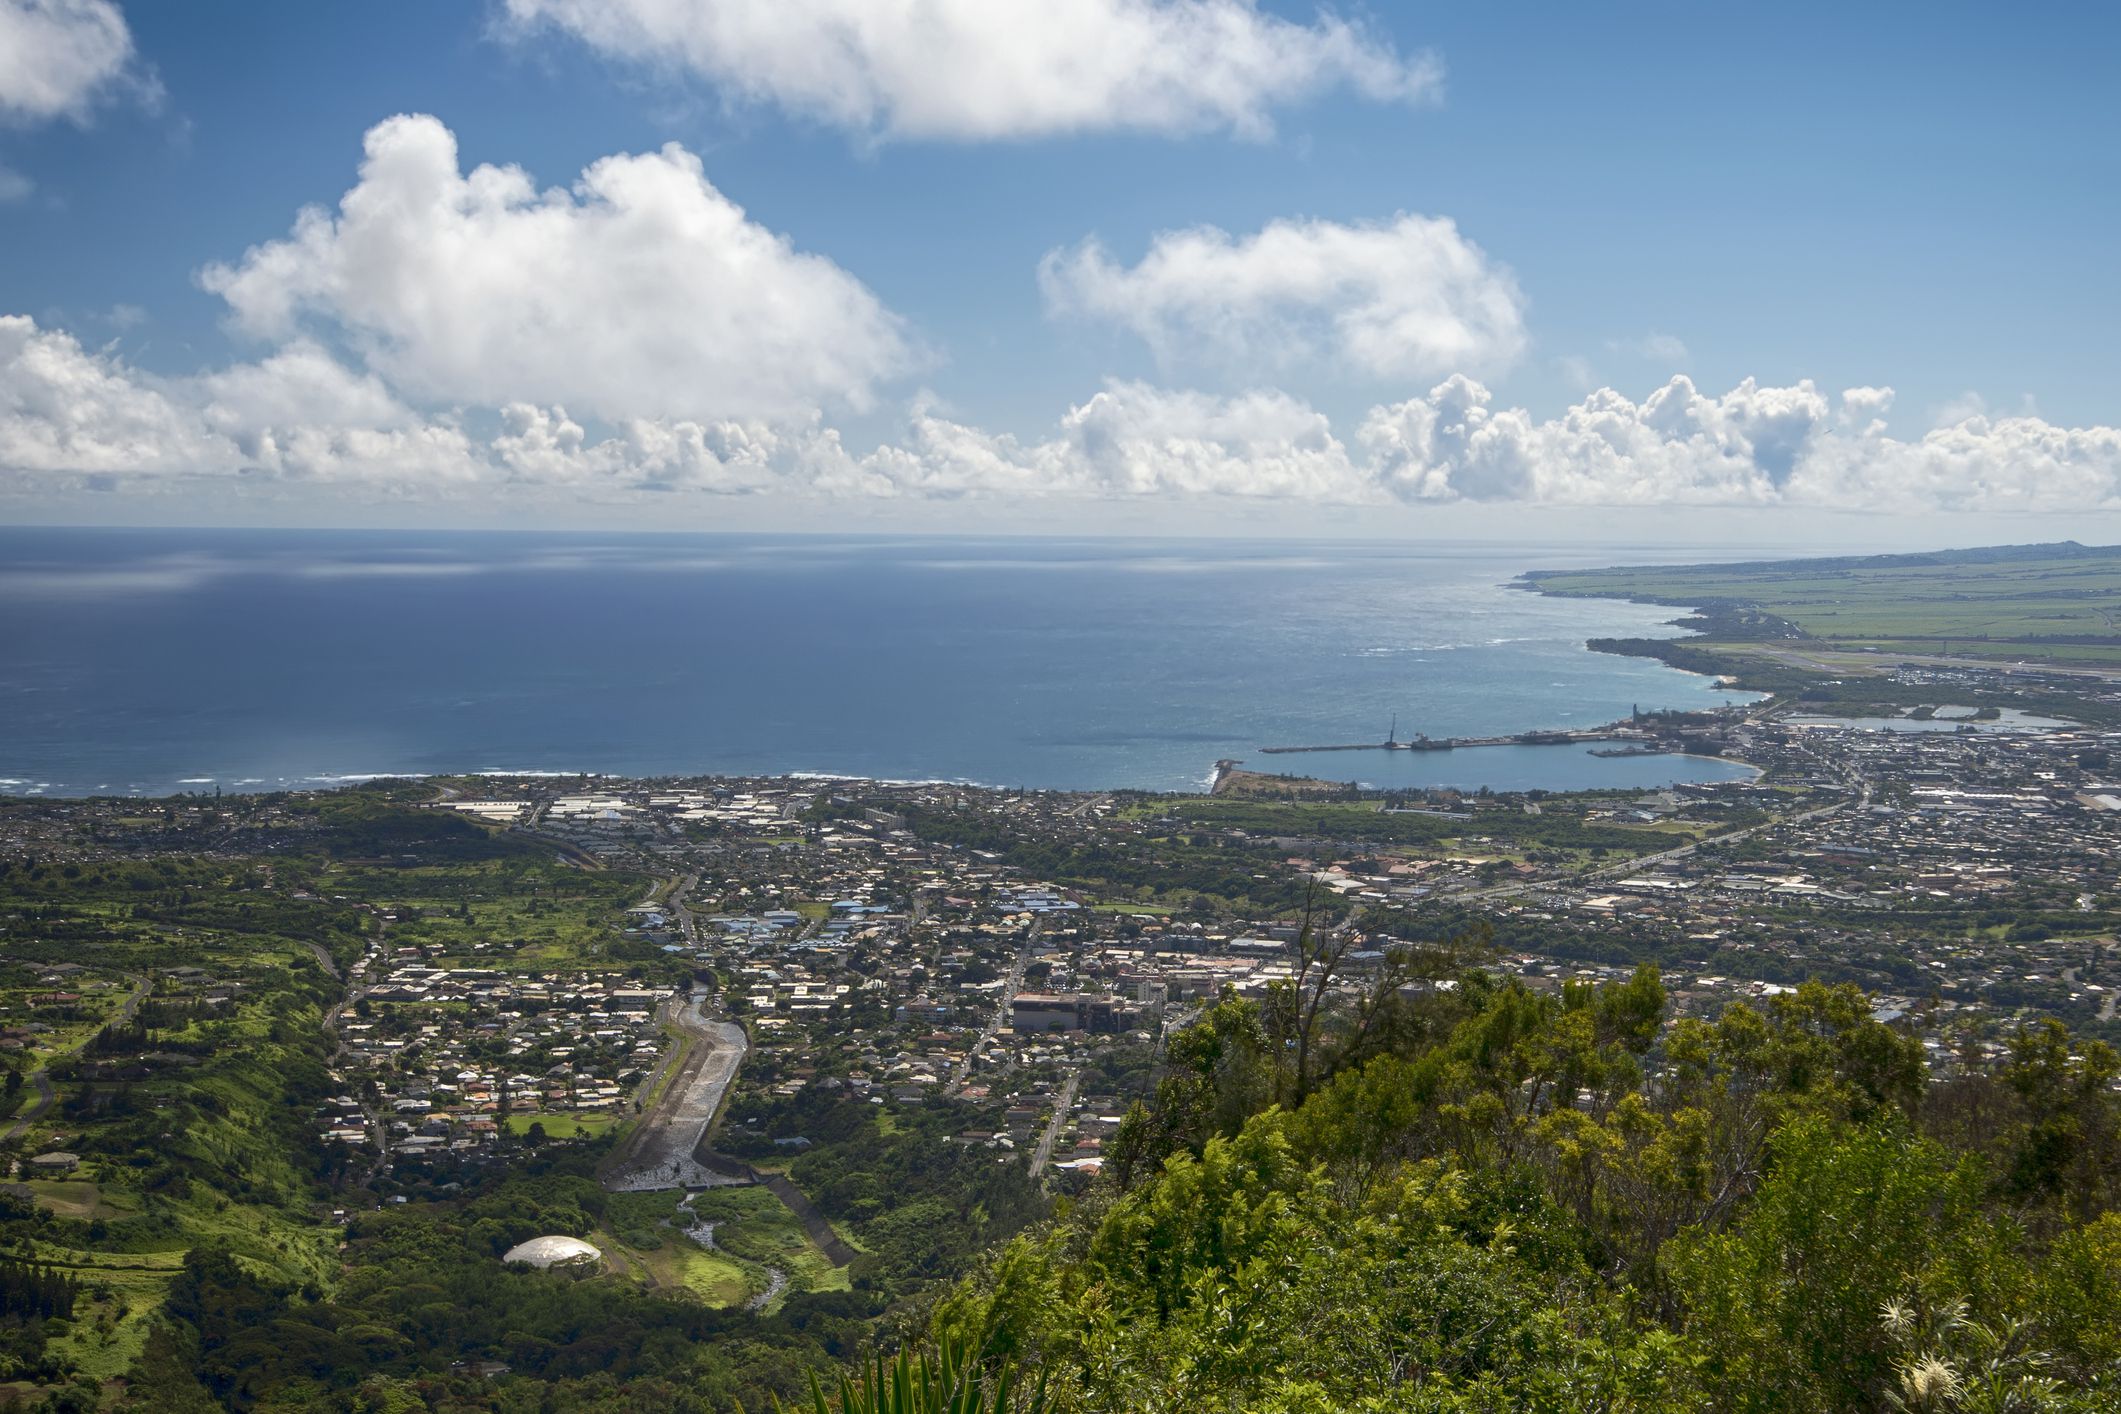 <p>Wailuku is located in central Maui, near the bigger city of Kahalui and commercial centers but set slightly away from the hustle and bustle of these areas.</p><ul><li>Population: 17,697</li><li>Median Household Income: $83,393</li><li>Cost of Living: 145% of U.S. average</li><li>Median Rent Price: $3,579</li><li>Home Price-to-Income Ratio: 10.5</li><li>Average Property Tax: 0.21%</li></ul><p class="padding-top-ms u-margin-bottom-ms"><b>Housing Affordability:</b> The average price to rent a home in Wailuku is $3,579, which is nearly 80% more than the national average. Prices have risen quite a bit over the last year, and the market is warm. The average home value here is around $872,000.</p>